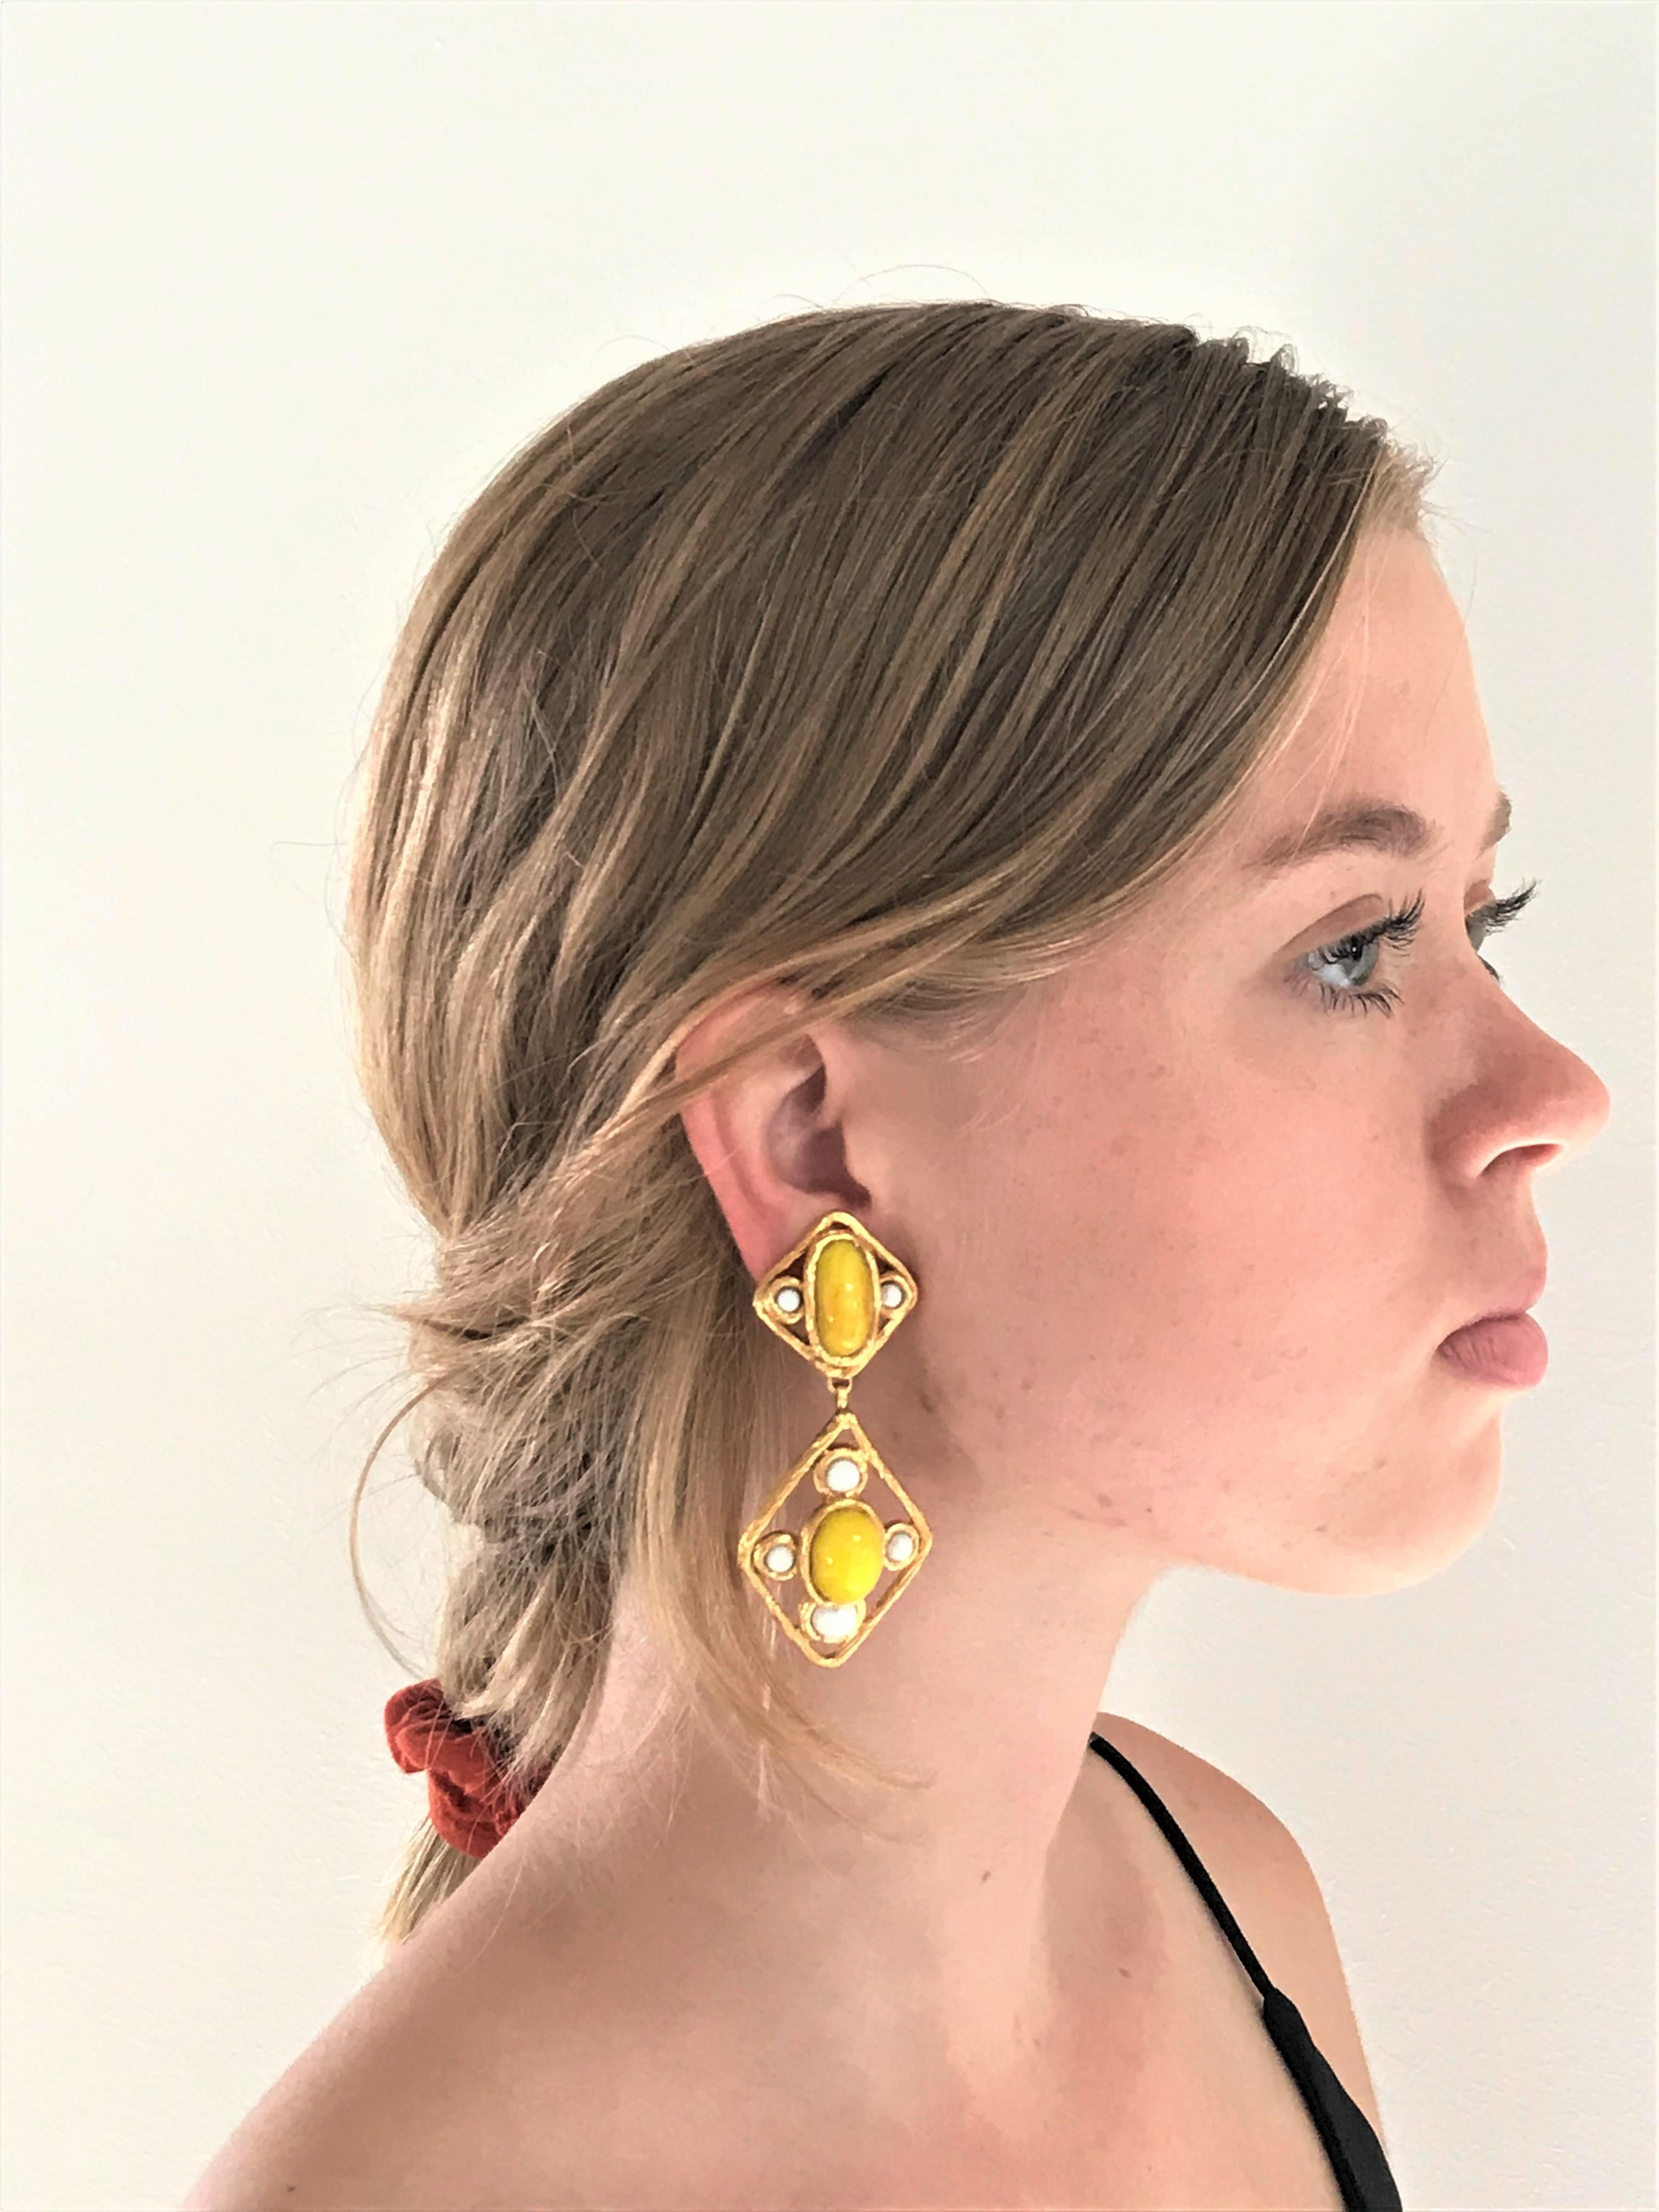 Great Chanel Gripoix glass ear clips each of kite shaped design set with white and yellow Gripoix glass. 

Dimensions: 7,5 cm/2,95